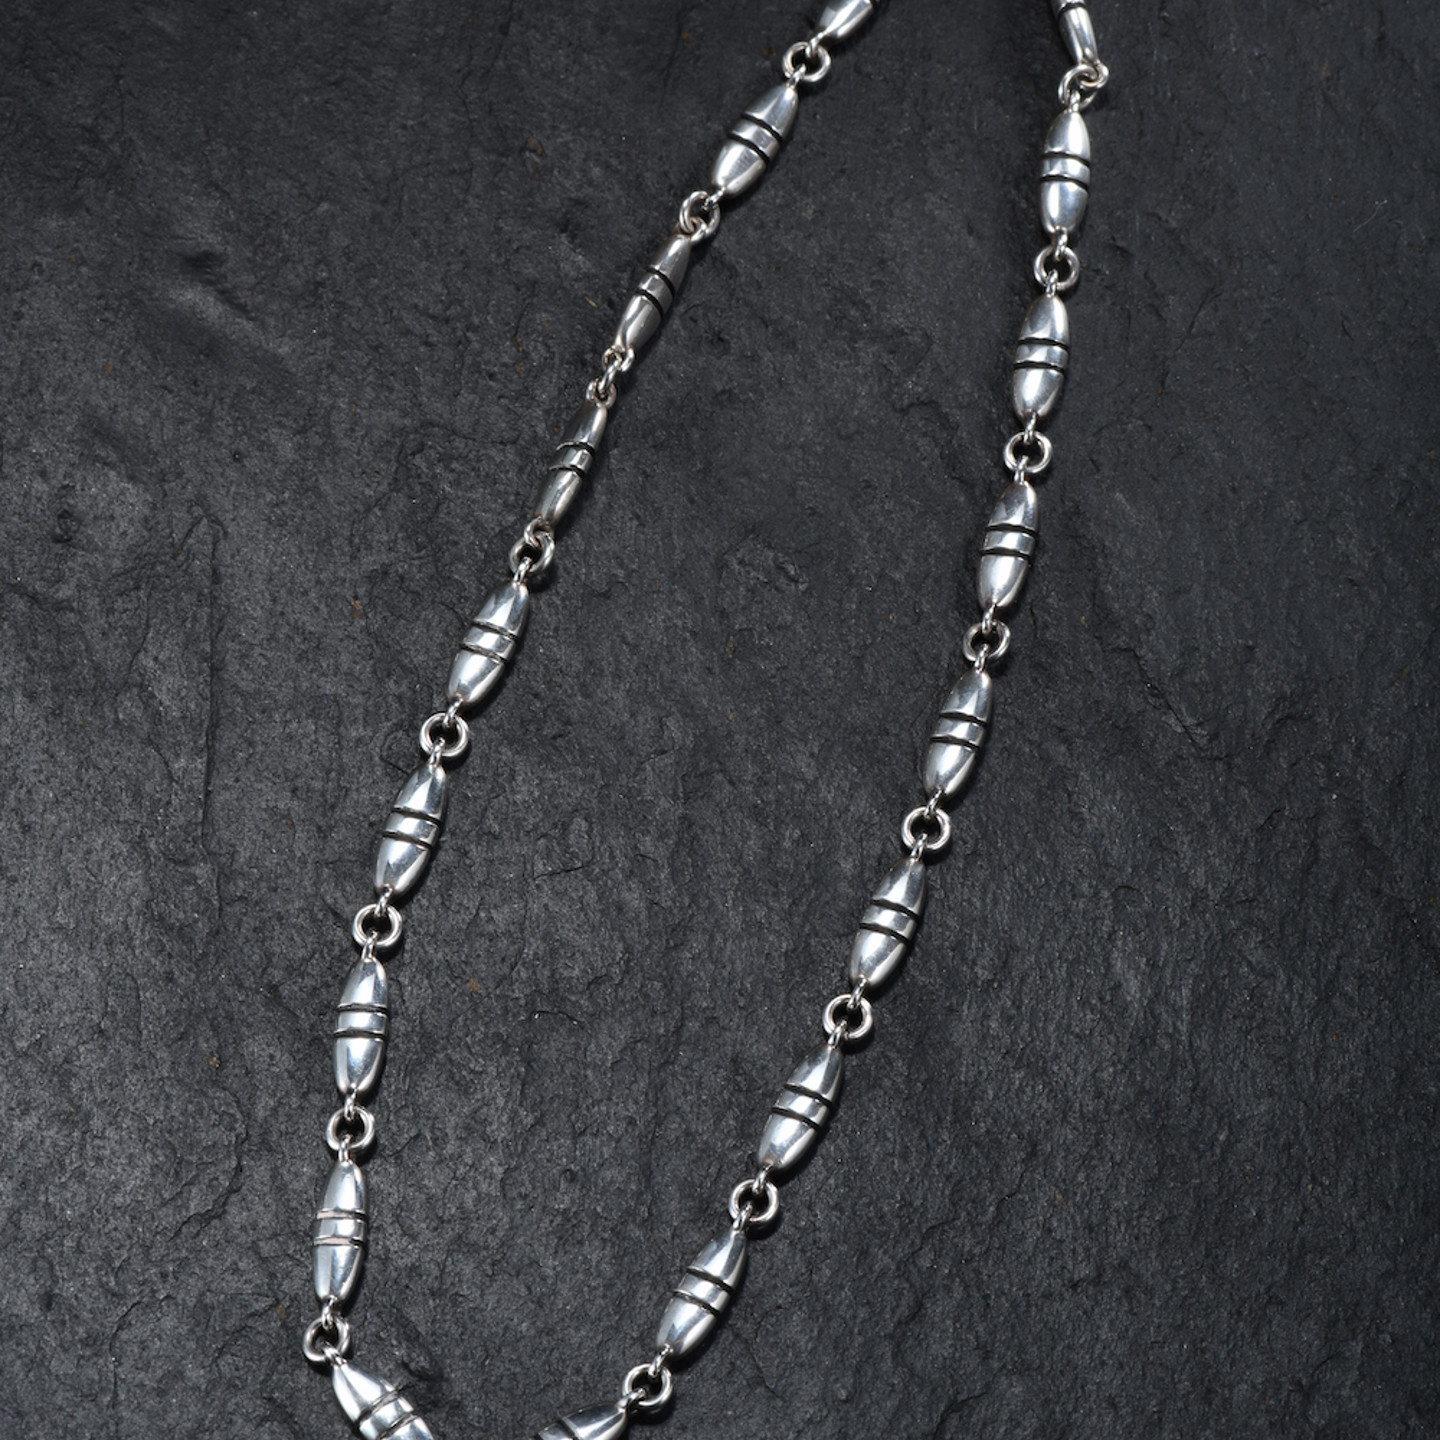 Georg Jensen Silver Necklace. Sold For £600